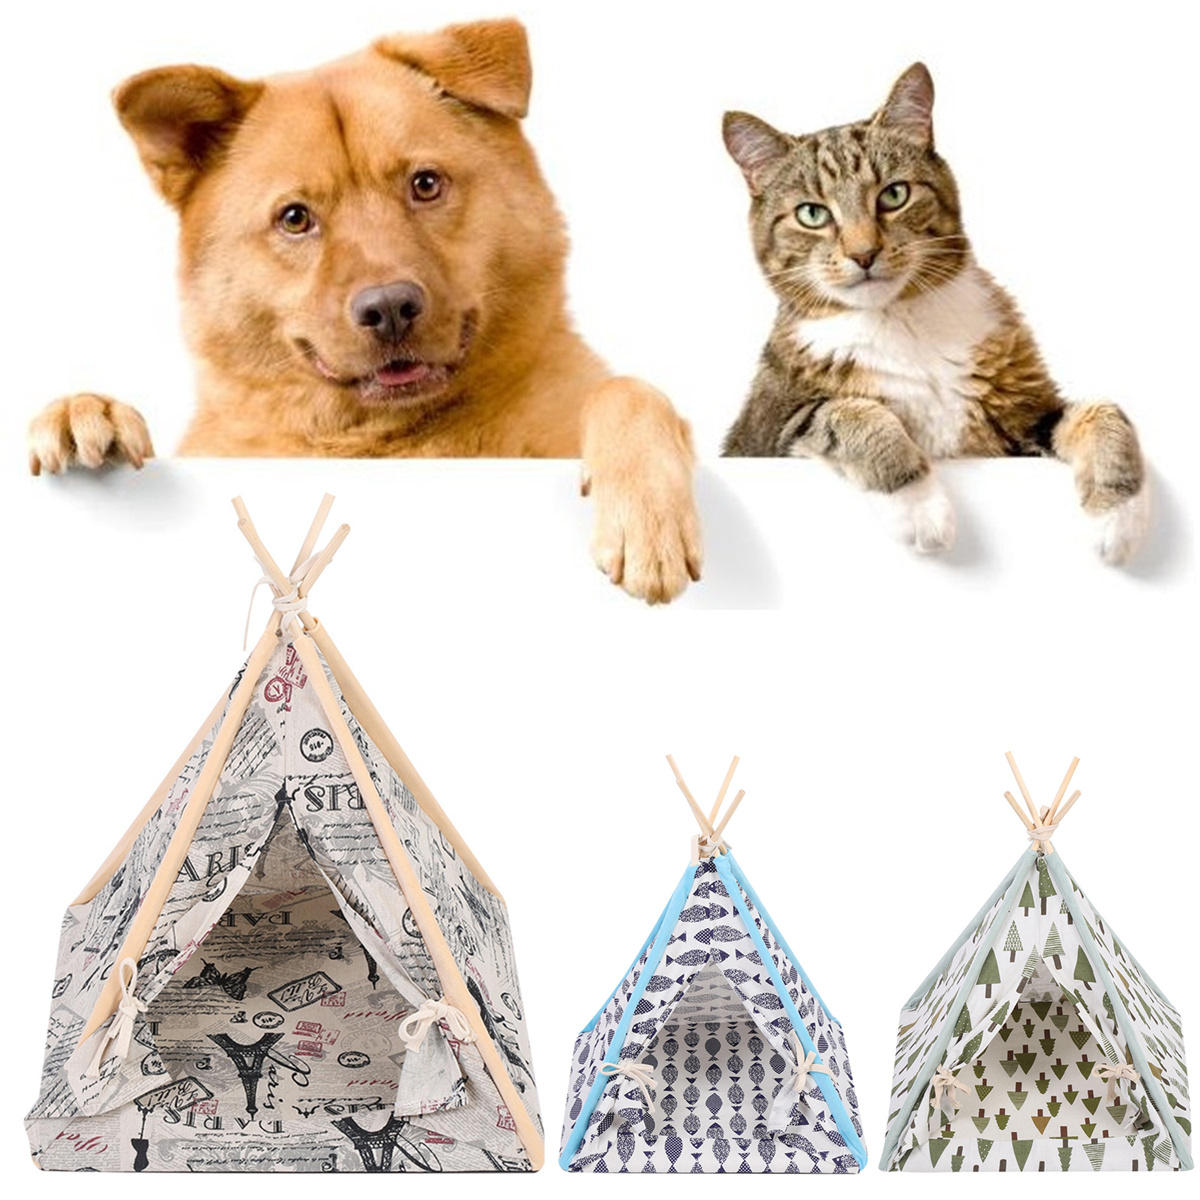 Fireplace Dogs Inspirational Foldable Linen Pet Dog House Washable Tent Puppy Cat Indoor Outdoor Teepee Mat